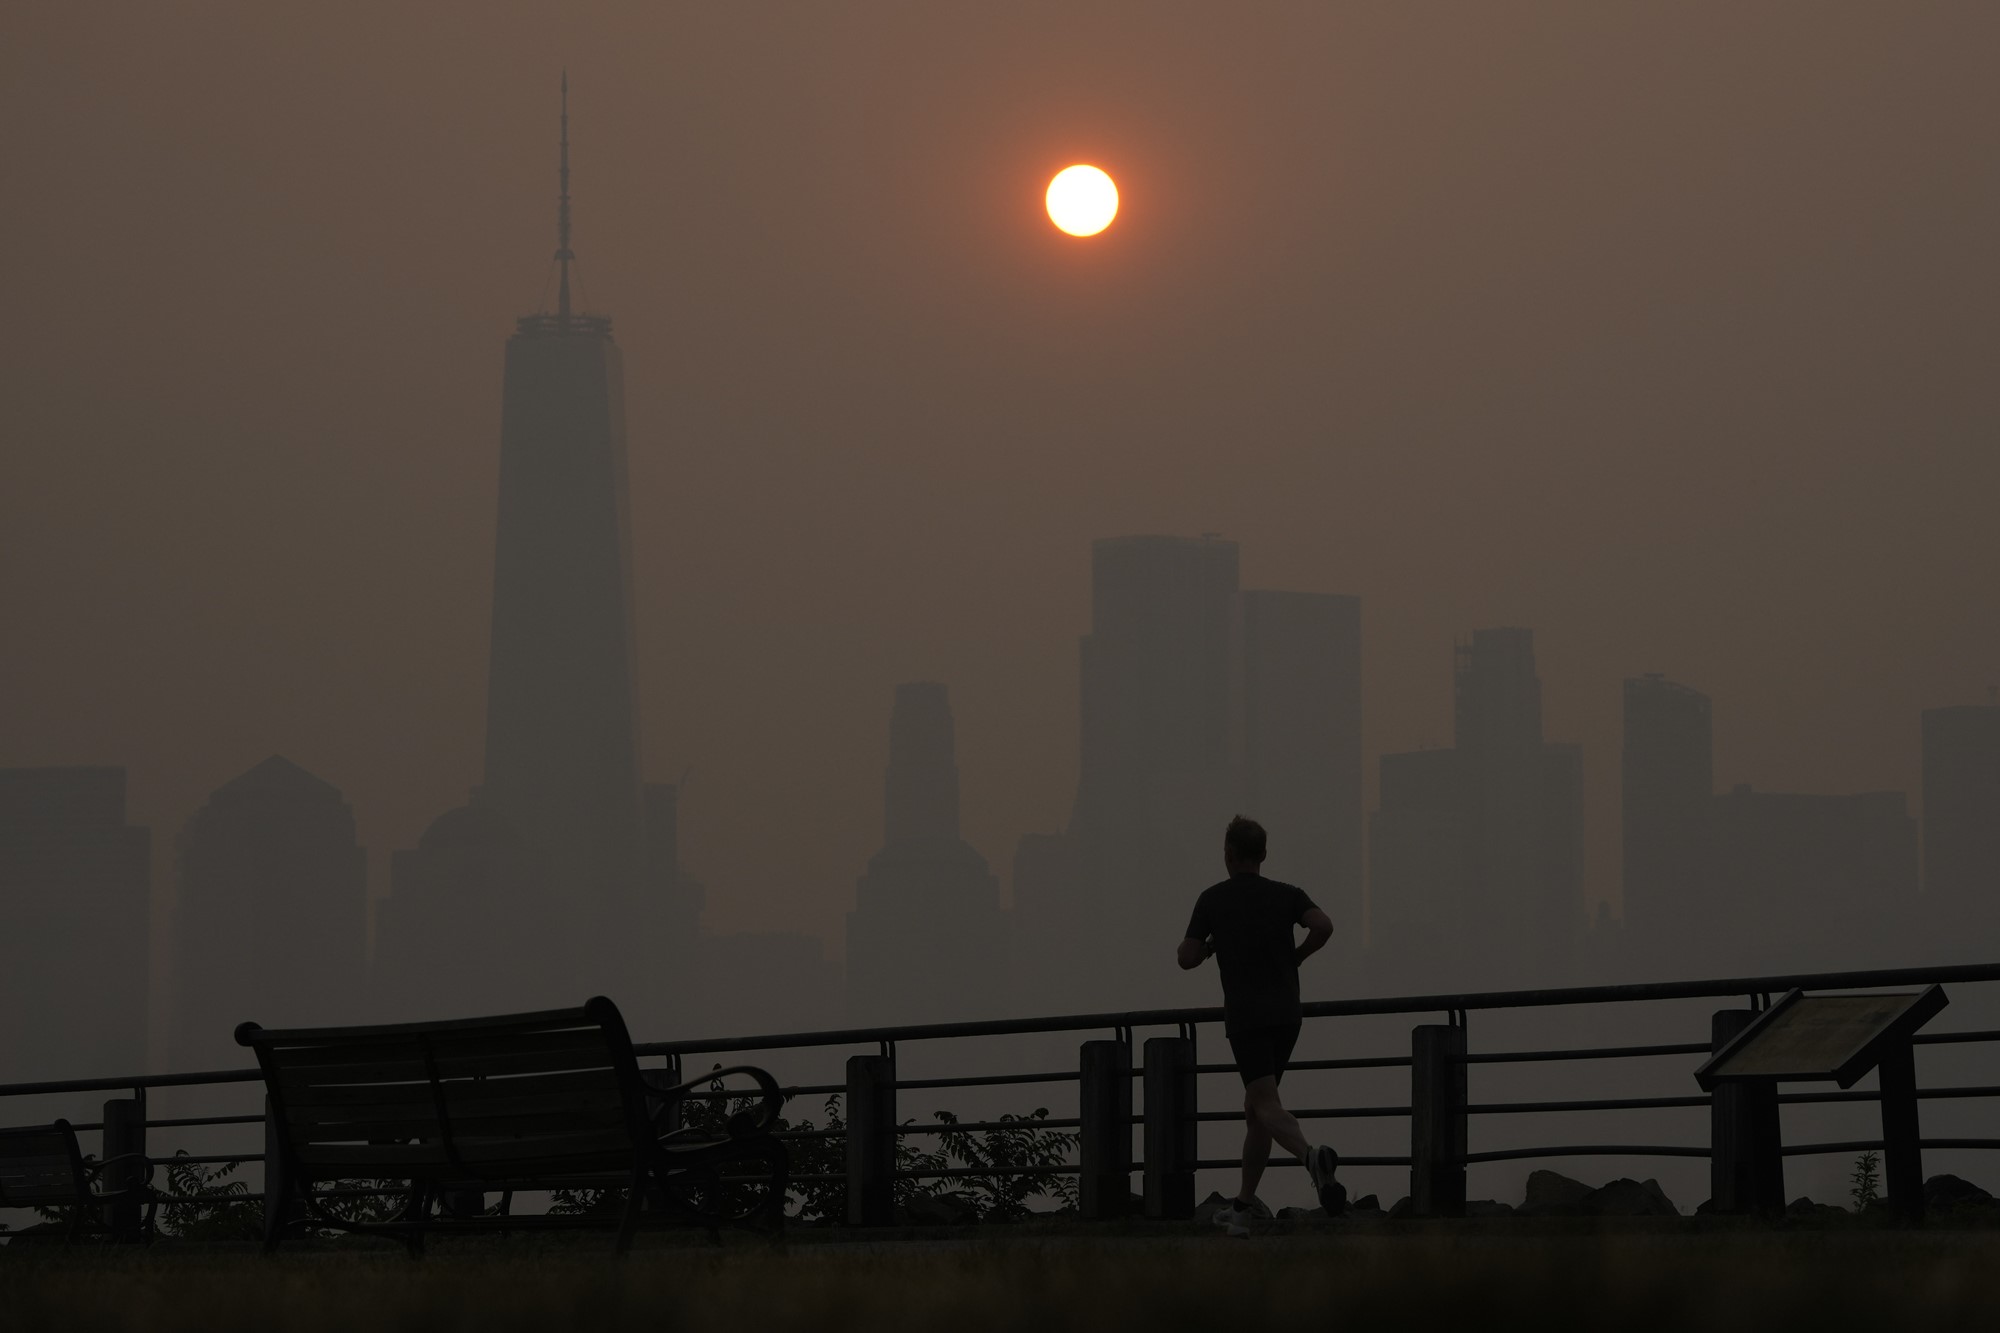 A person seen running, with the New York City skyline behind them in an orange haze